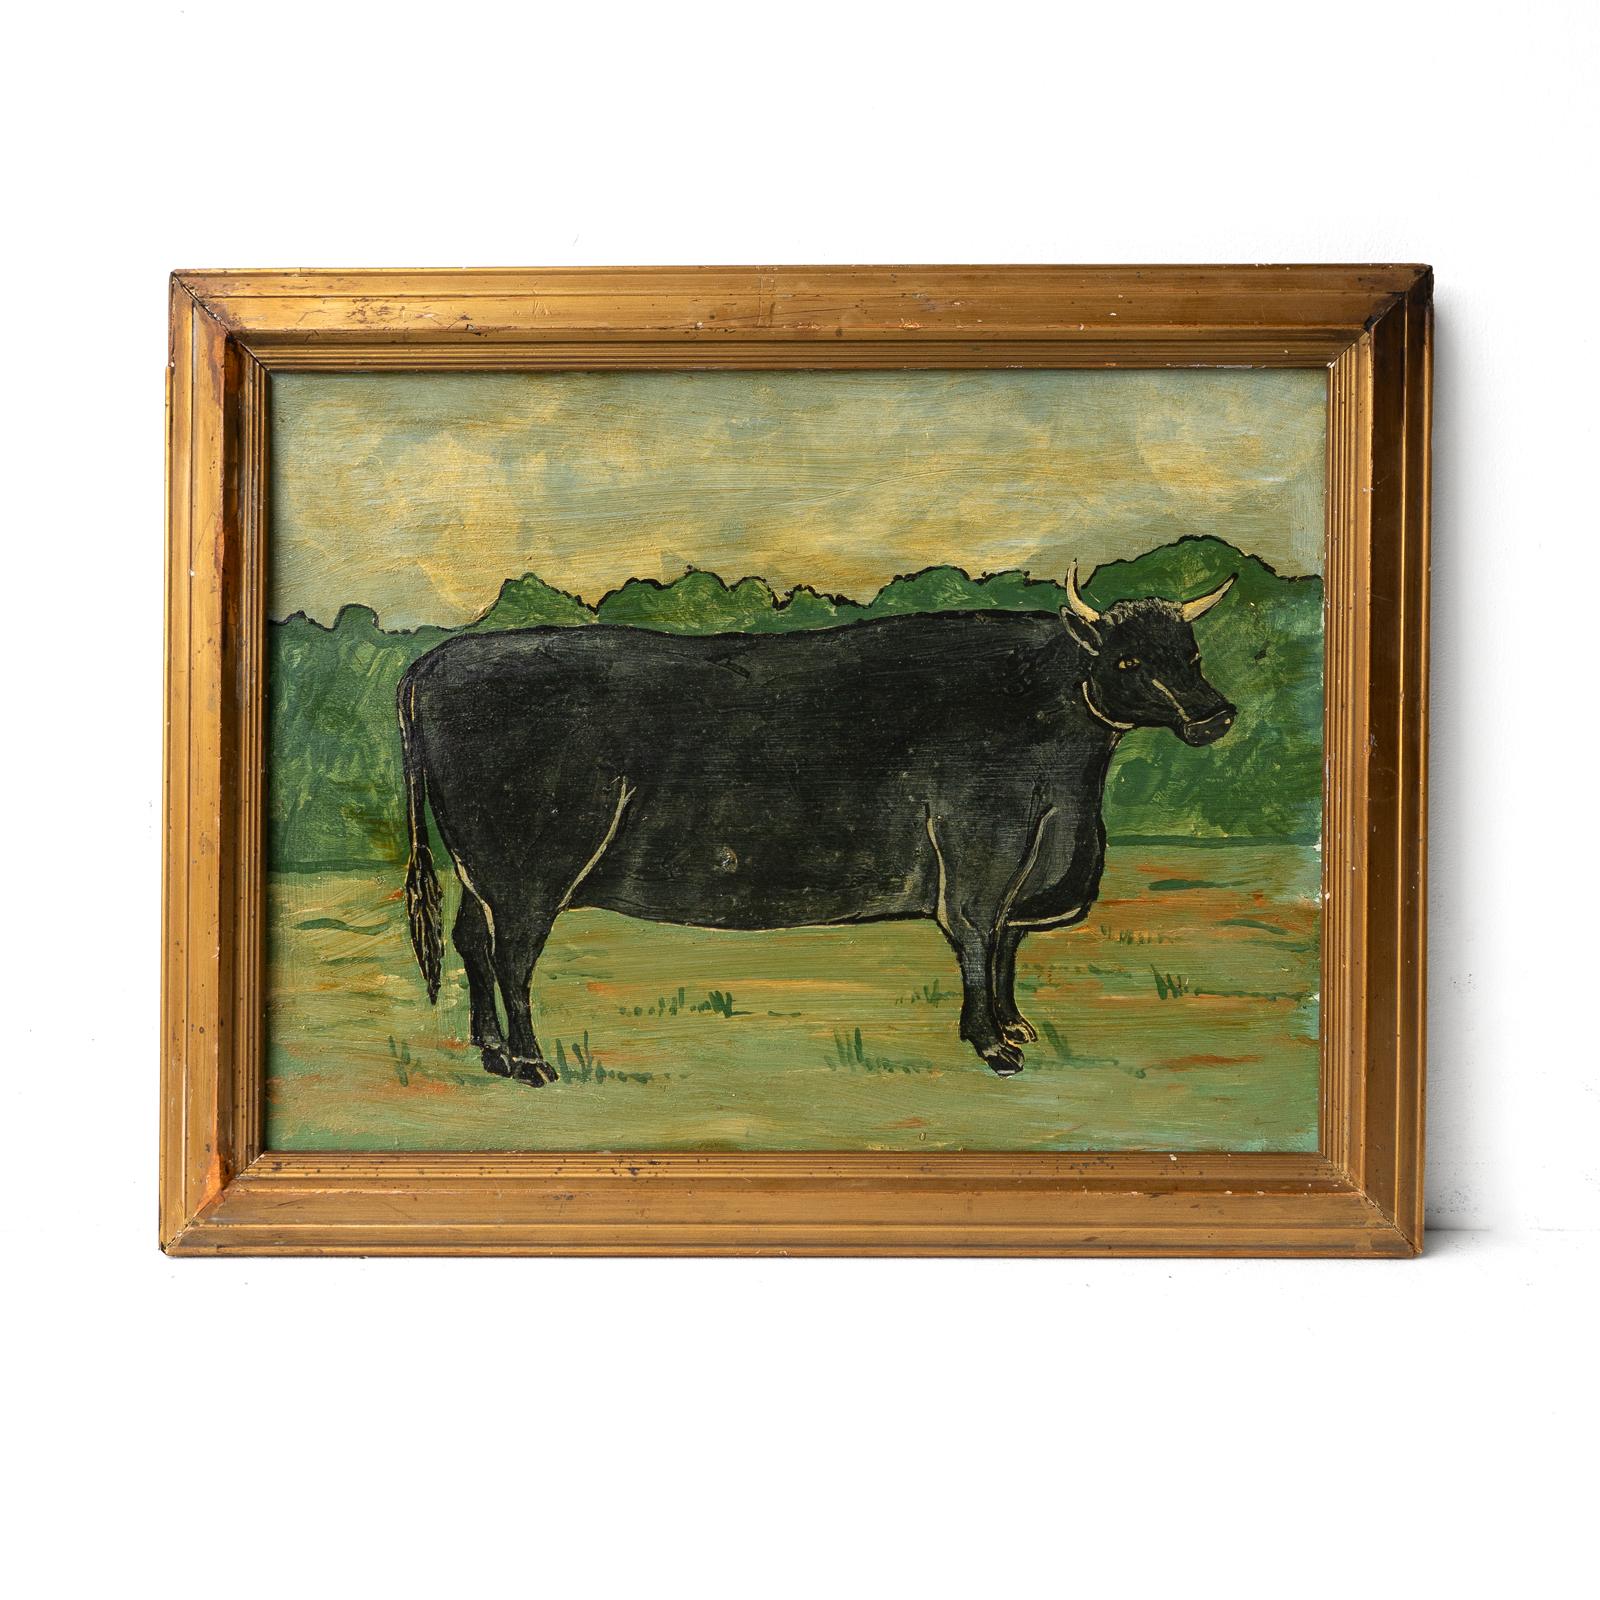 VINTAGE FRAMED PAINTING
Depicting a horned black cow standing in a field with a charming glint in its eye.

Painted in a naive folk art style.

Probably dating to the mid-20th Century, c 1930s-1960s period.

Framed in a simple gilt frame.

The